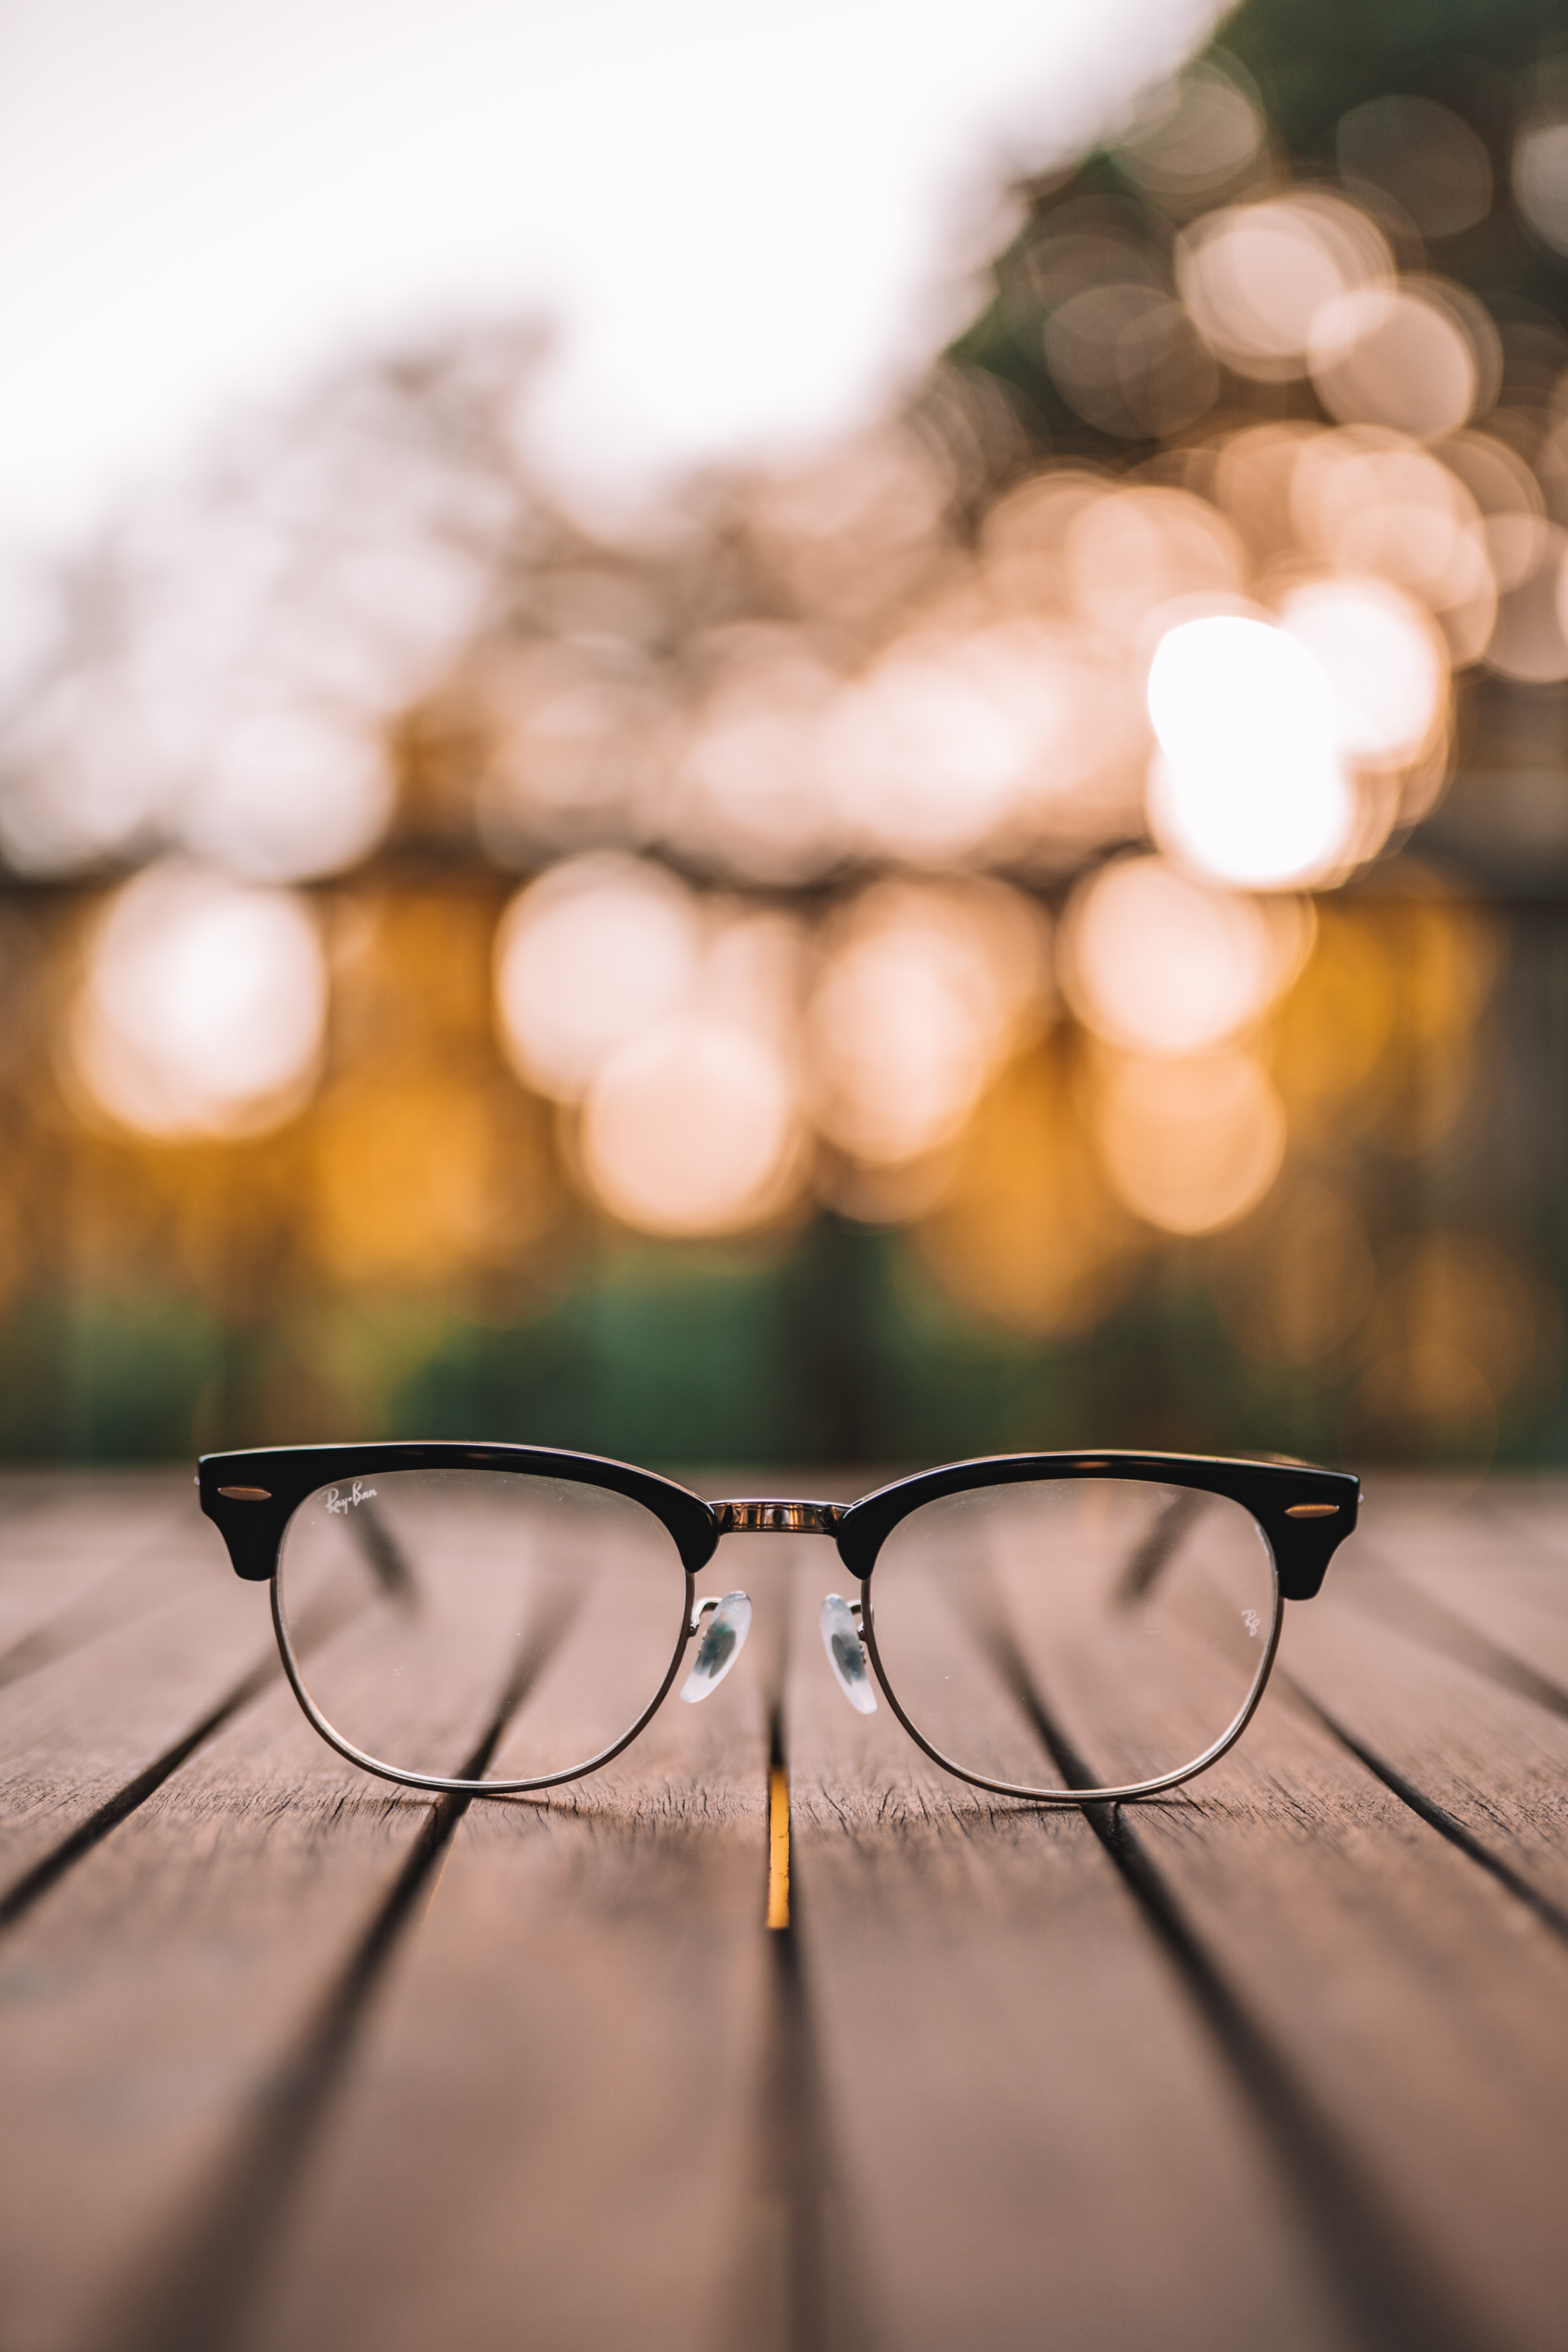 miscellanea, miscellaneous, wood, wooden, blur, smooth, lenses, planks, board, glasses, spectacles phone background